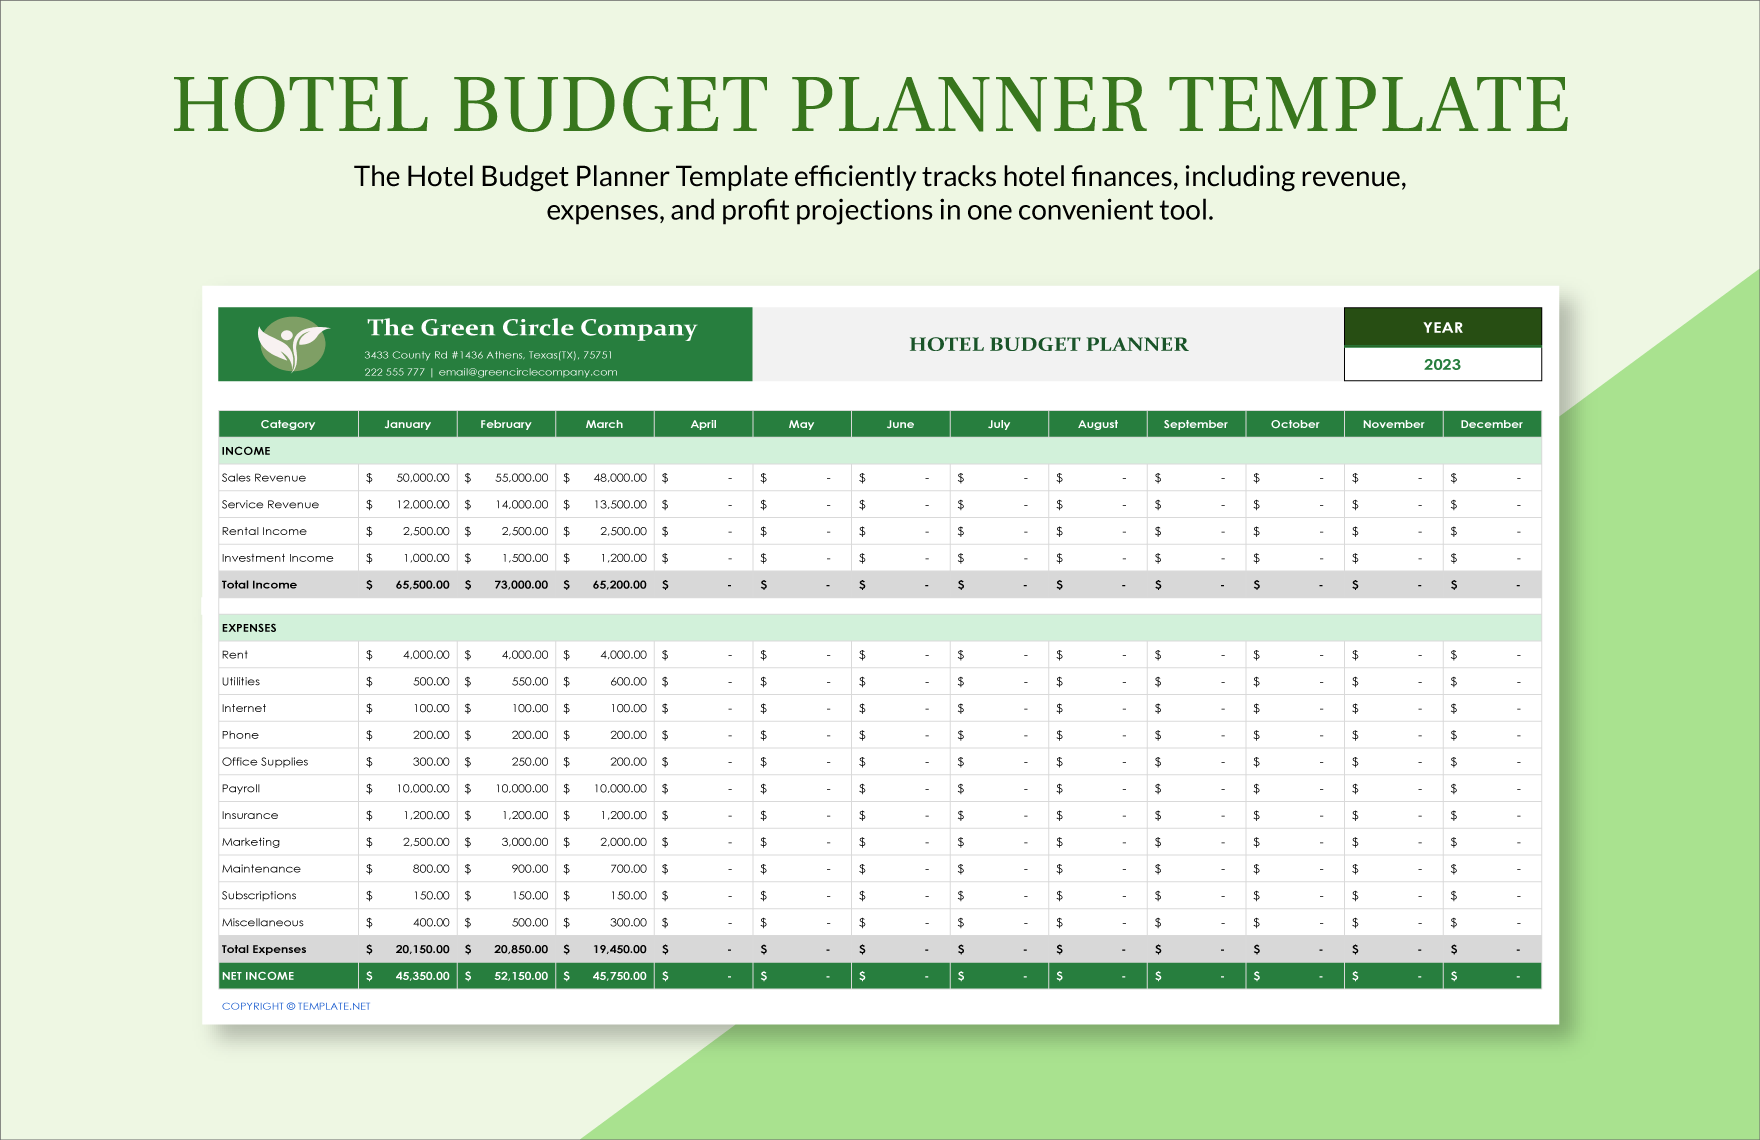 Hotel Budget Template